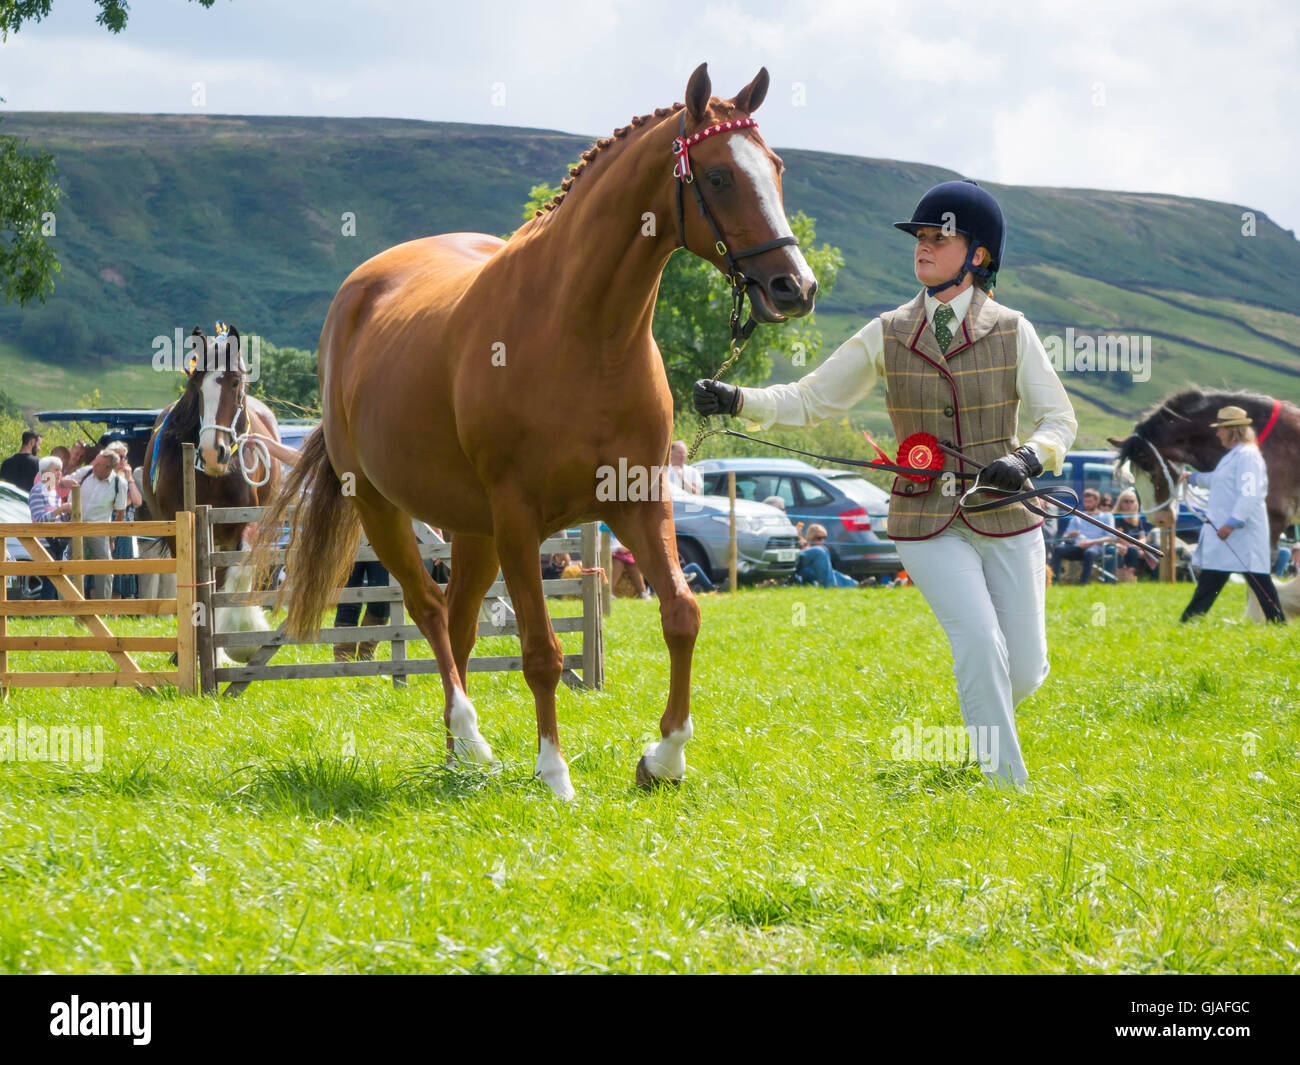 First Prize winner Pure Bred Arab Horse Becca Loralie in the show ring  at the  Danby Agricultural Show Yorkshire 2016 Stock Photo